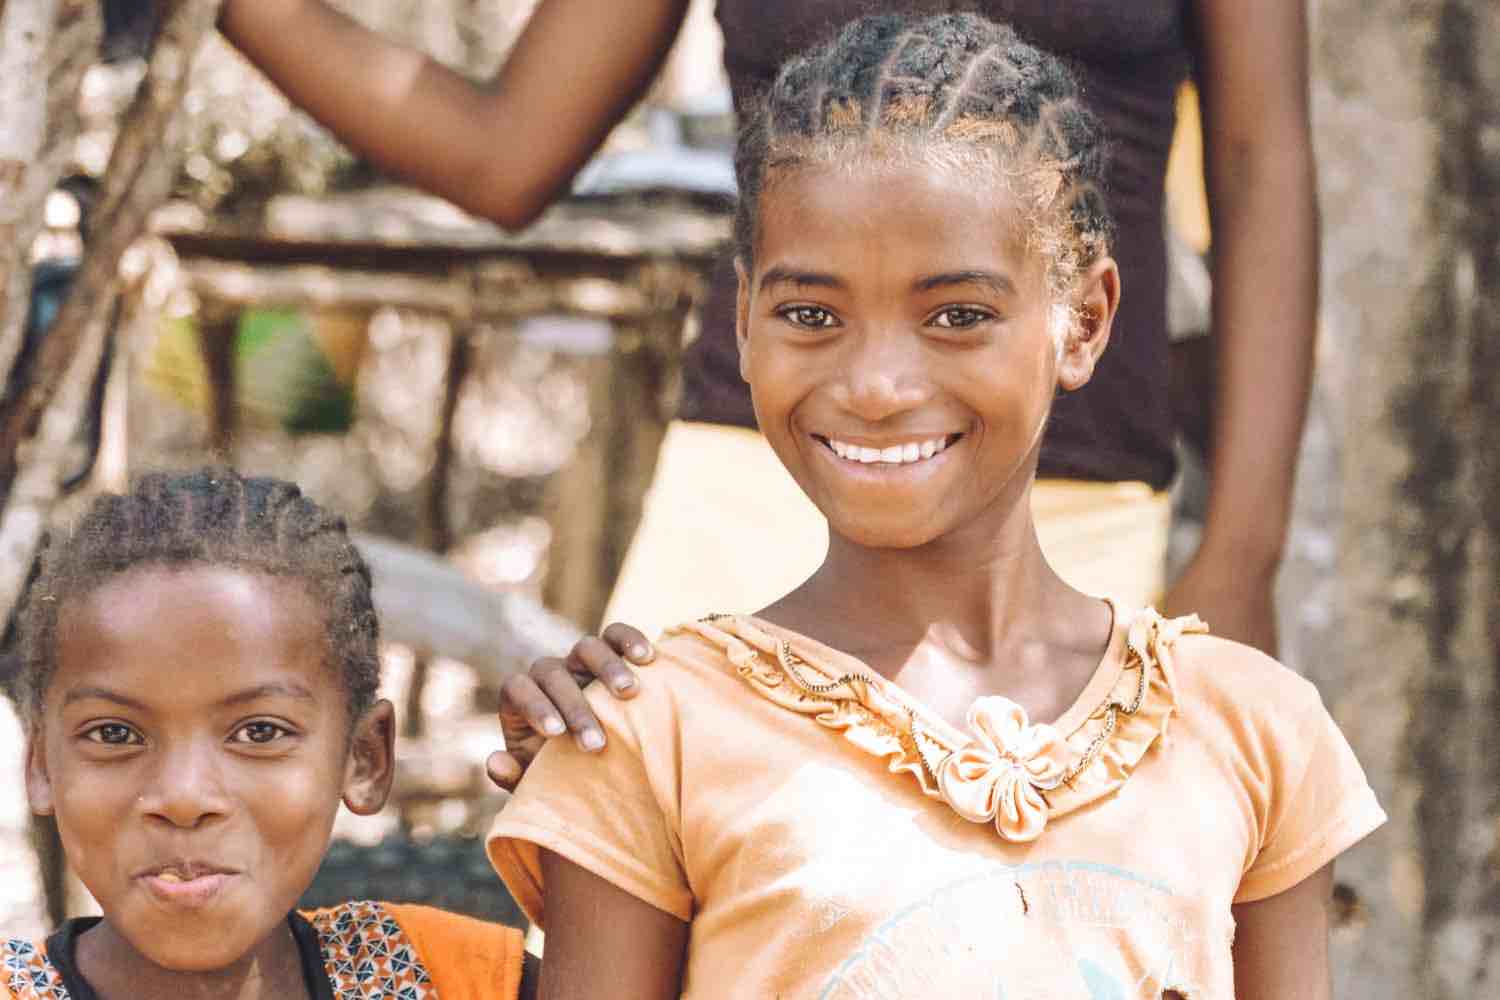 Young Malagasy girls smiling in Tsingy